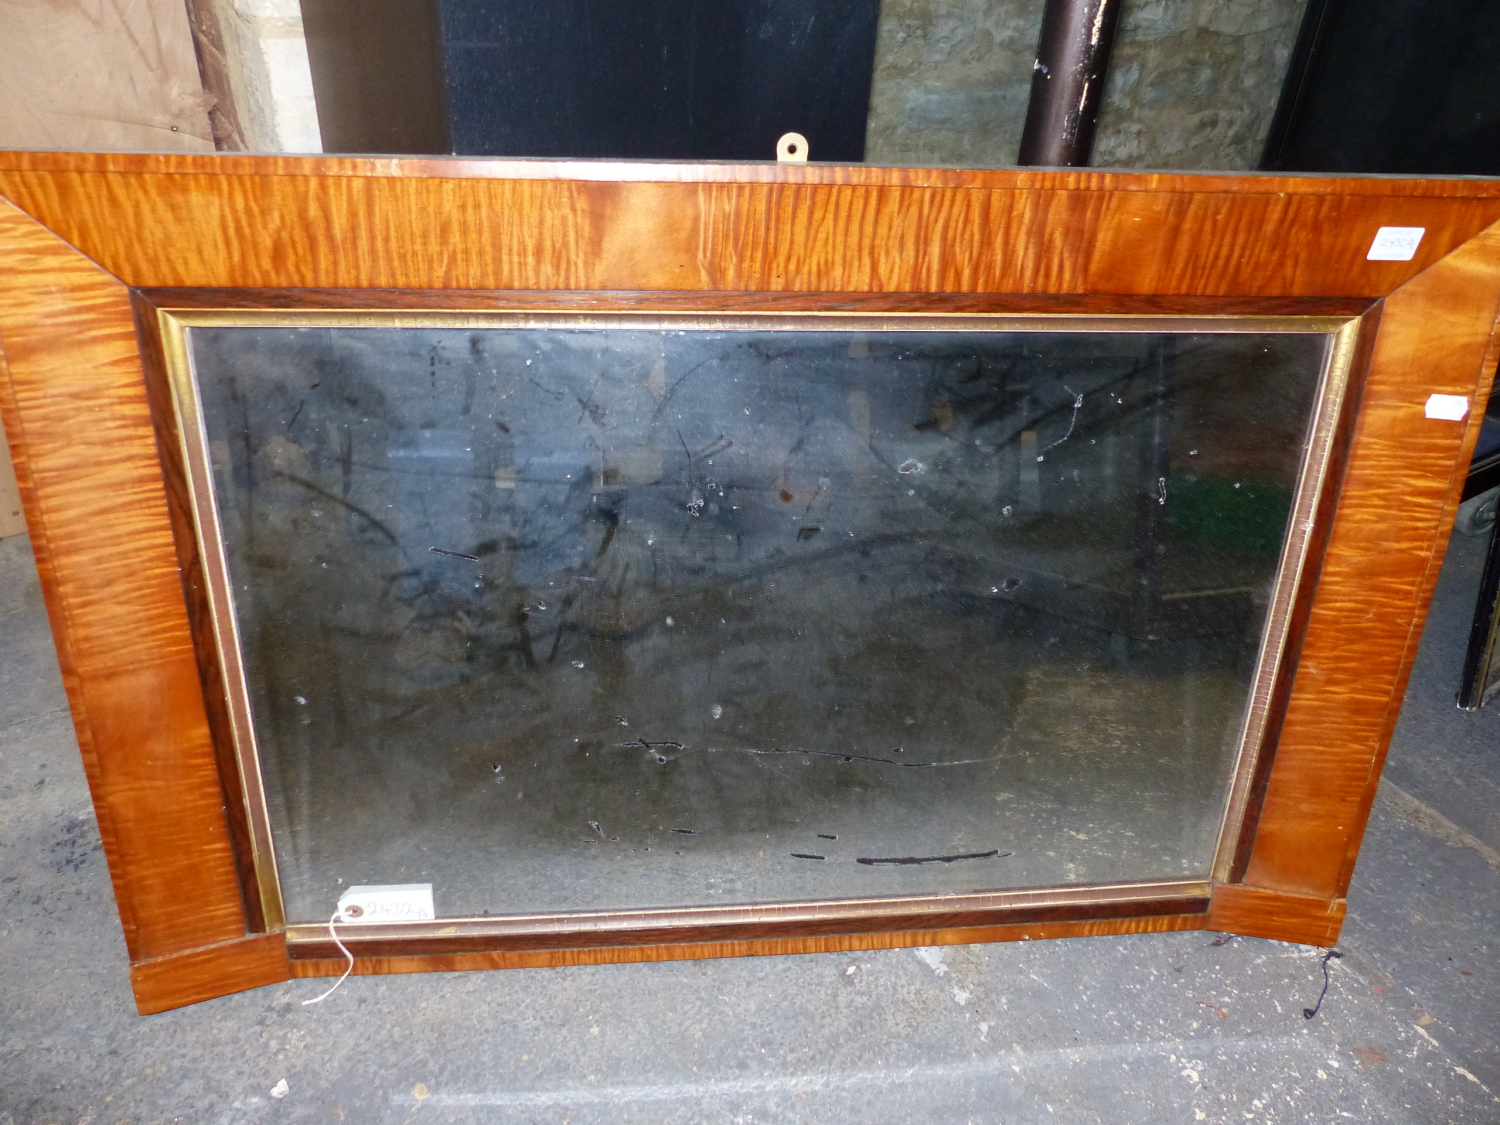 AN ANTIQUE MAPLE OVERMANTLE MIRROR. 62 x 96cms.